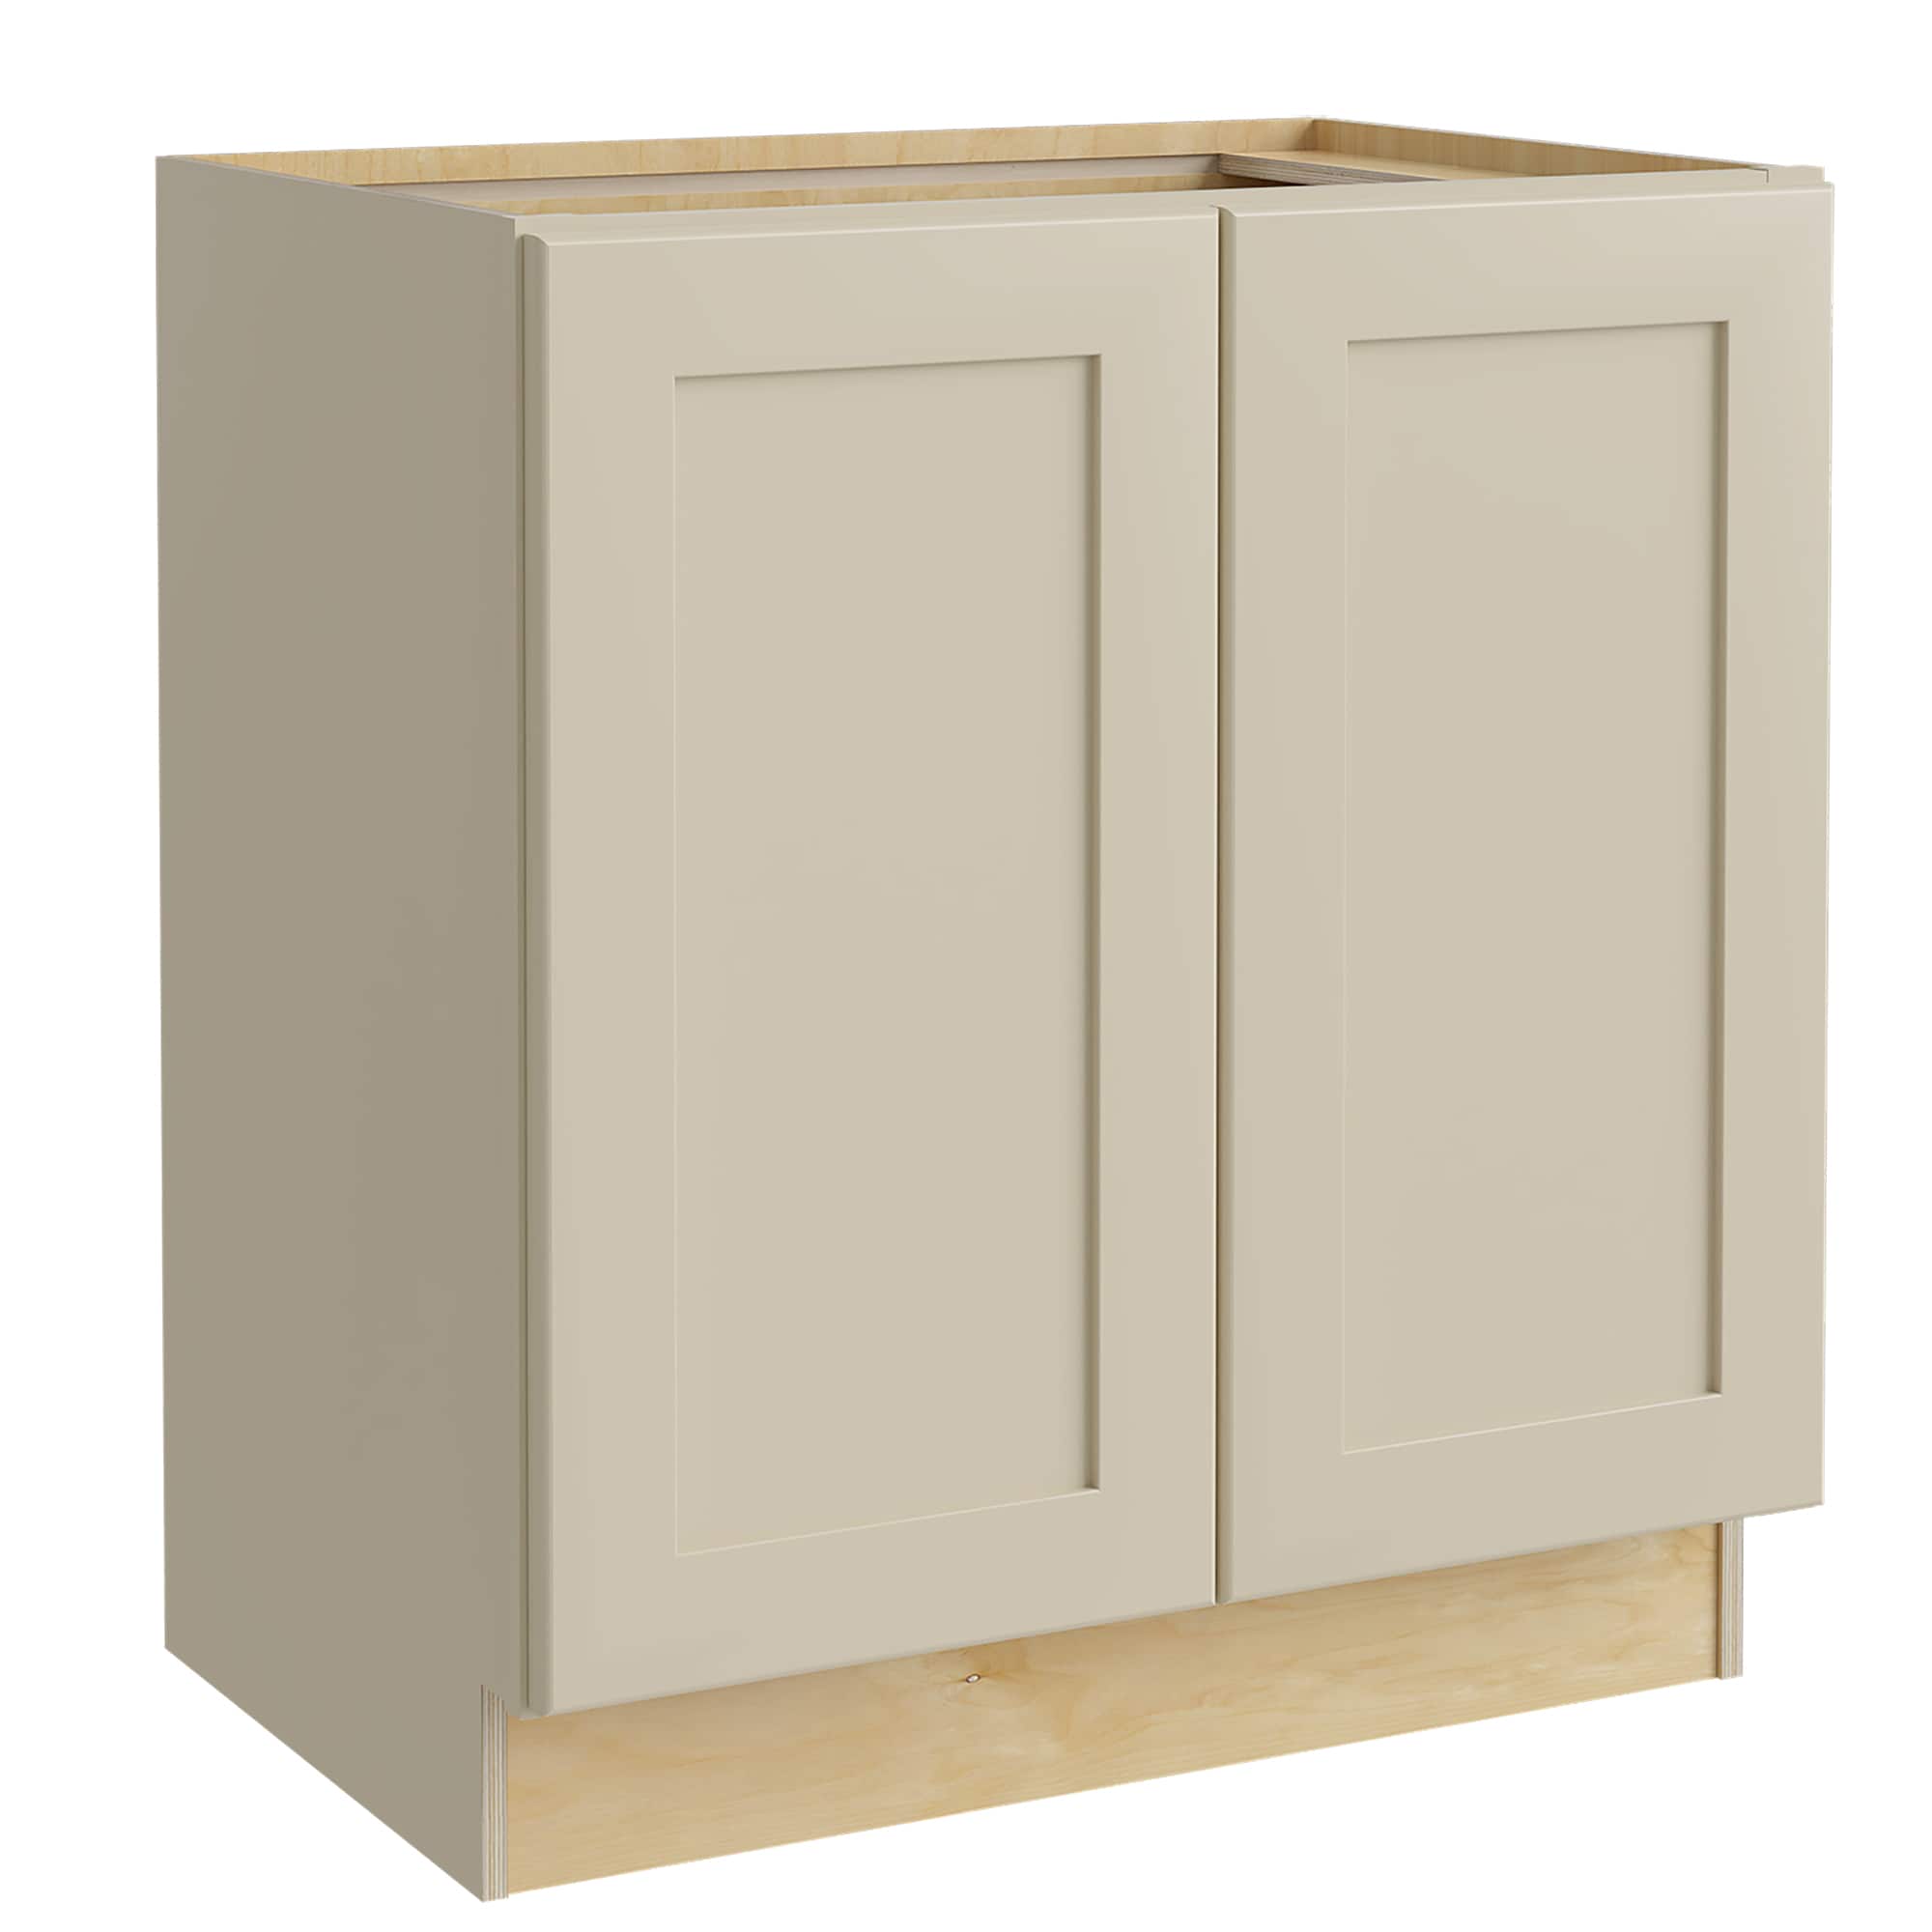 Luxxe Cabinetry 30-in W x 34.5-in H x 24-in D Norfolk Blended Cream Painted Door Base Fully Assembled Semi-custom Cabinet in Off-White | B30FH-NBC